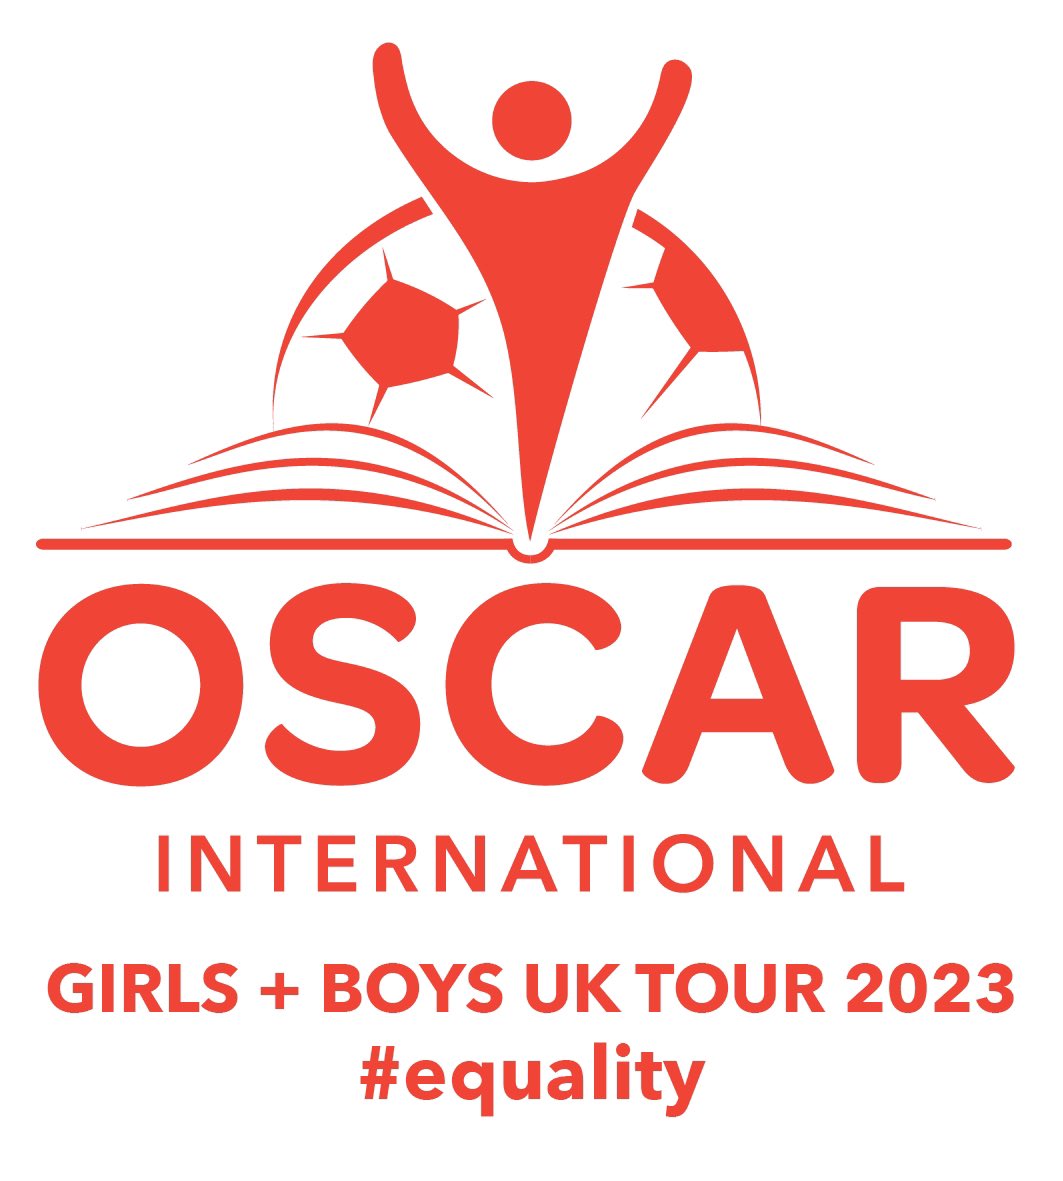 The OSCAR community in India & schools across the U.K. are grateful for your support & excited to work with you. #OSCARUKTOUR23 #educationwithakick #movementforgood #CharityTuesday #education #EducationForAll #Equality